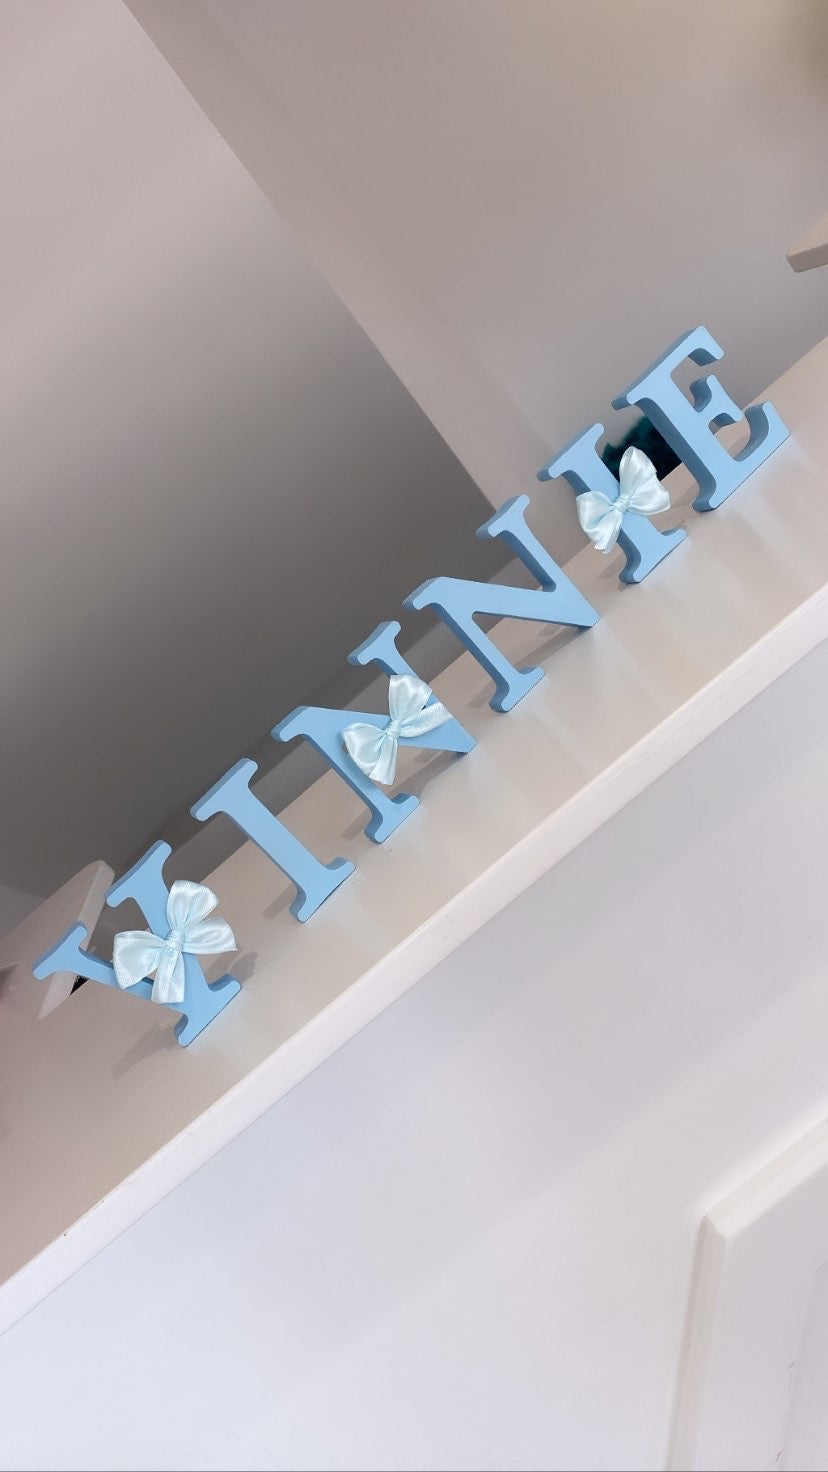 BLUE Free Standing Decorative Letter 2-4 WEEKS